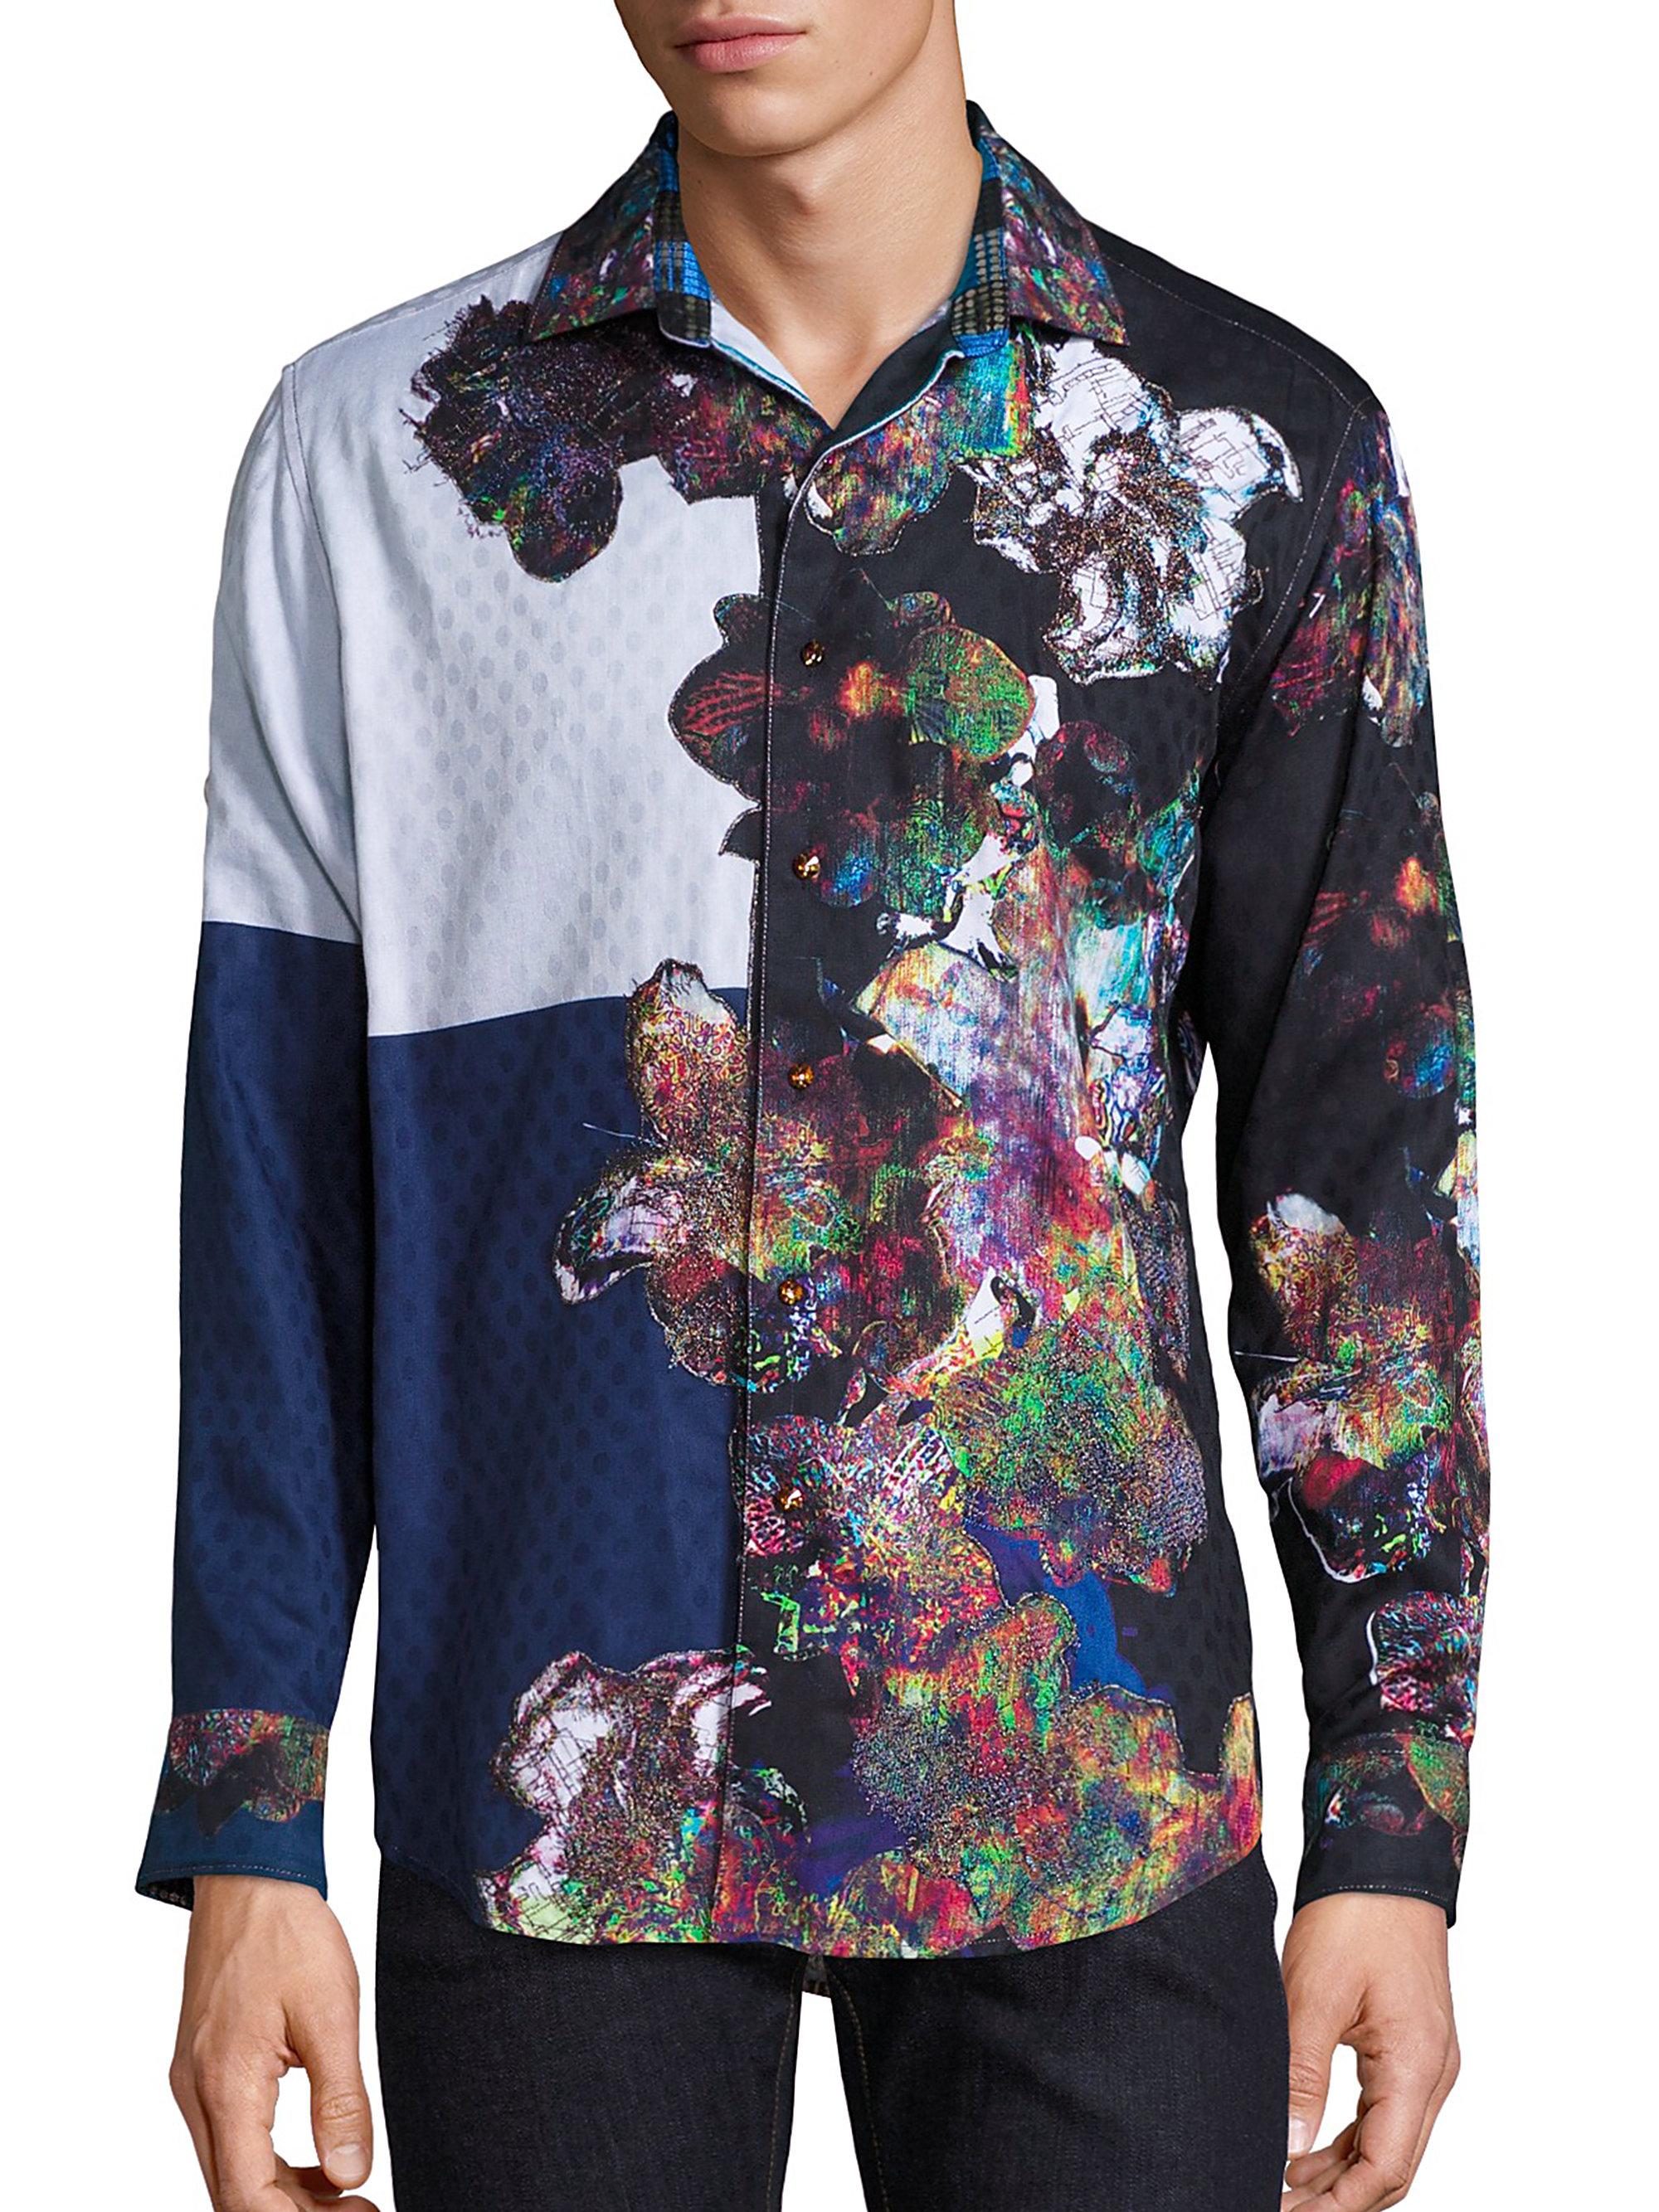 Lyst - Robert Graham Magical Wings Floral Embroidery Shirt in Blue for Men